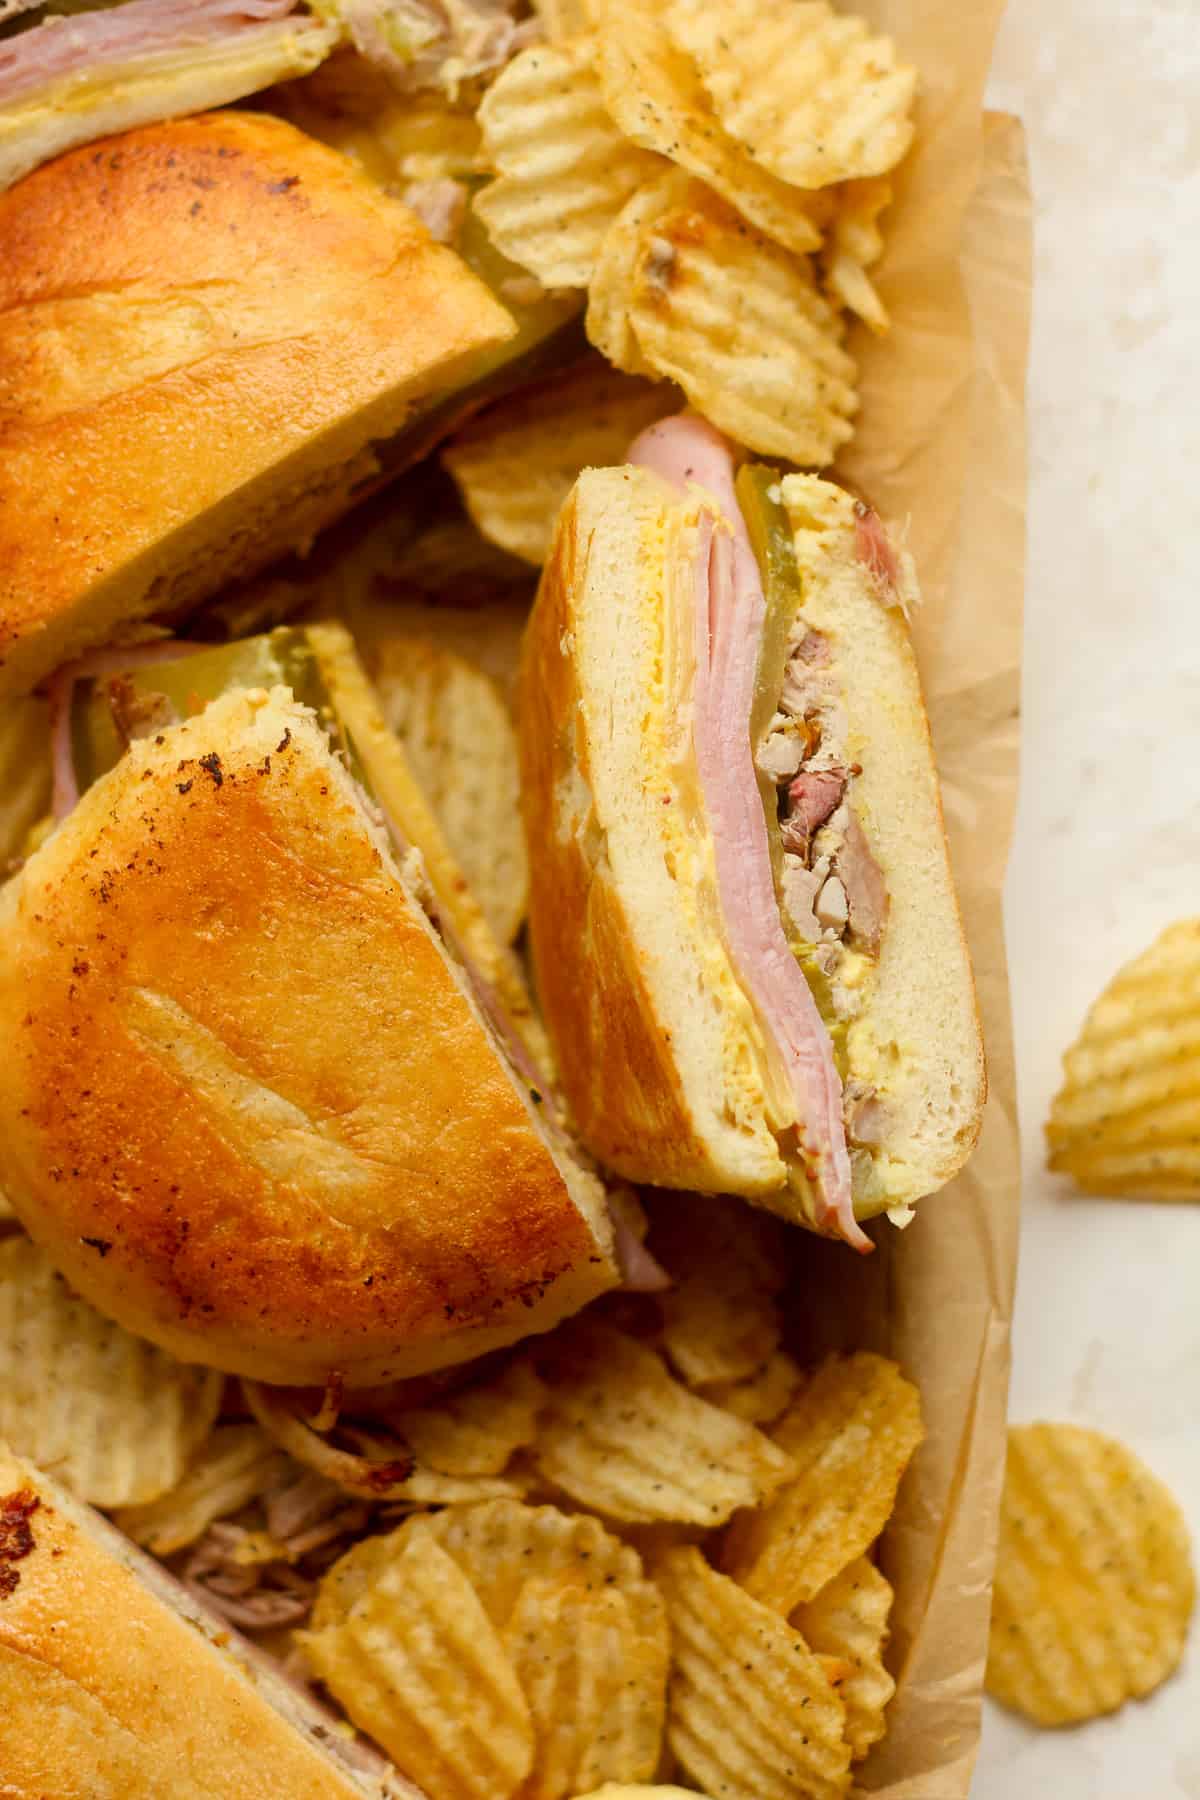 A pan of halved Cuban sandwiches with some chips.